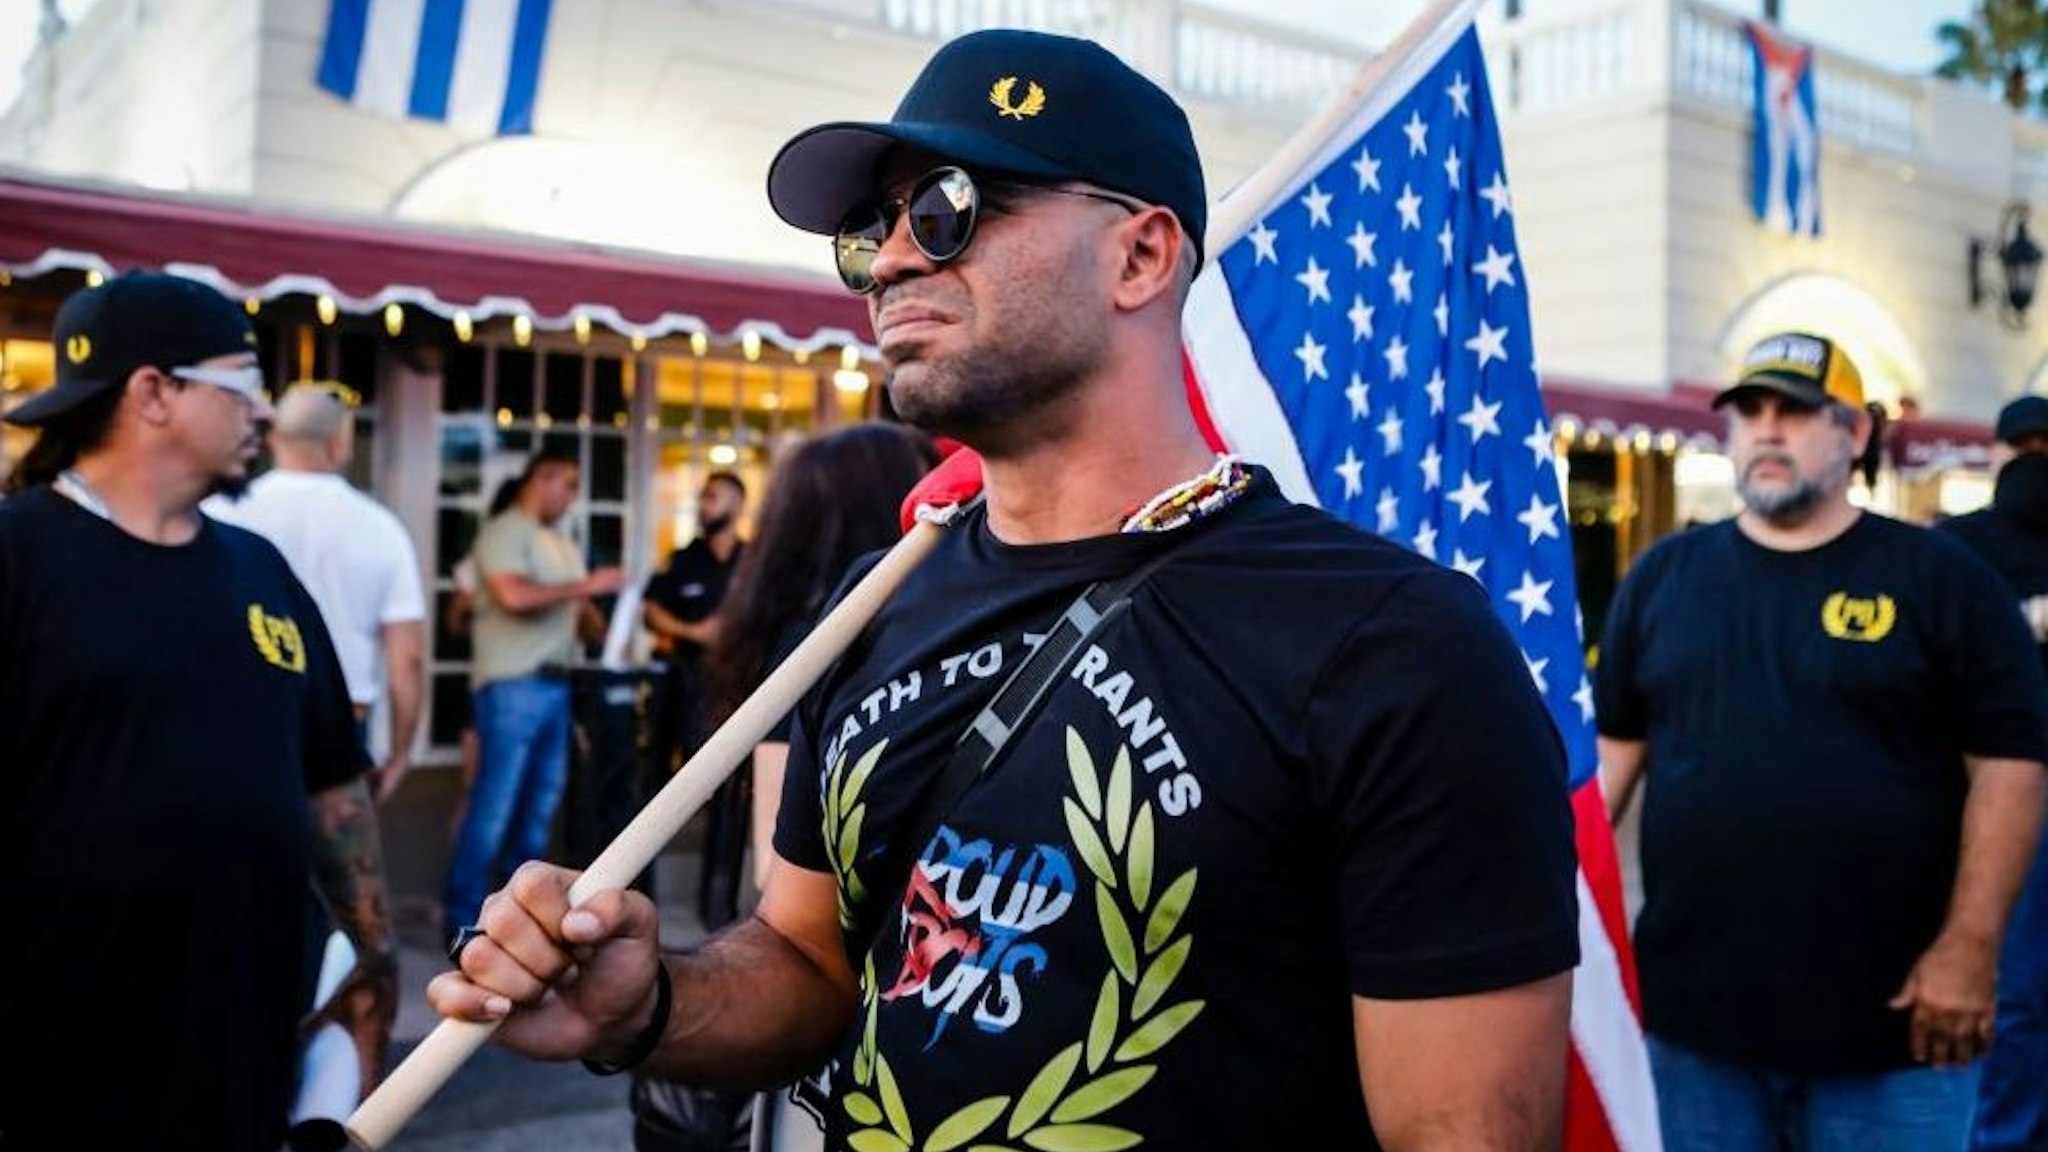 Henry "Enrique" Tarrio, leader of The Proud Boys, holds an US flags during a protest showing support for Cubans demonstrating against their government, in Miami, Florida on July 16, 2021.